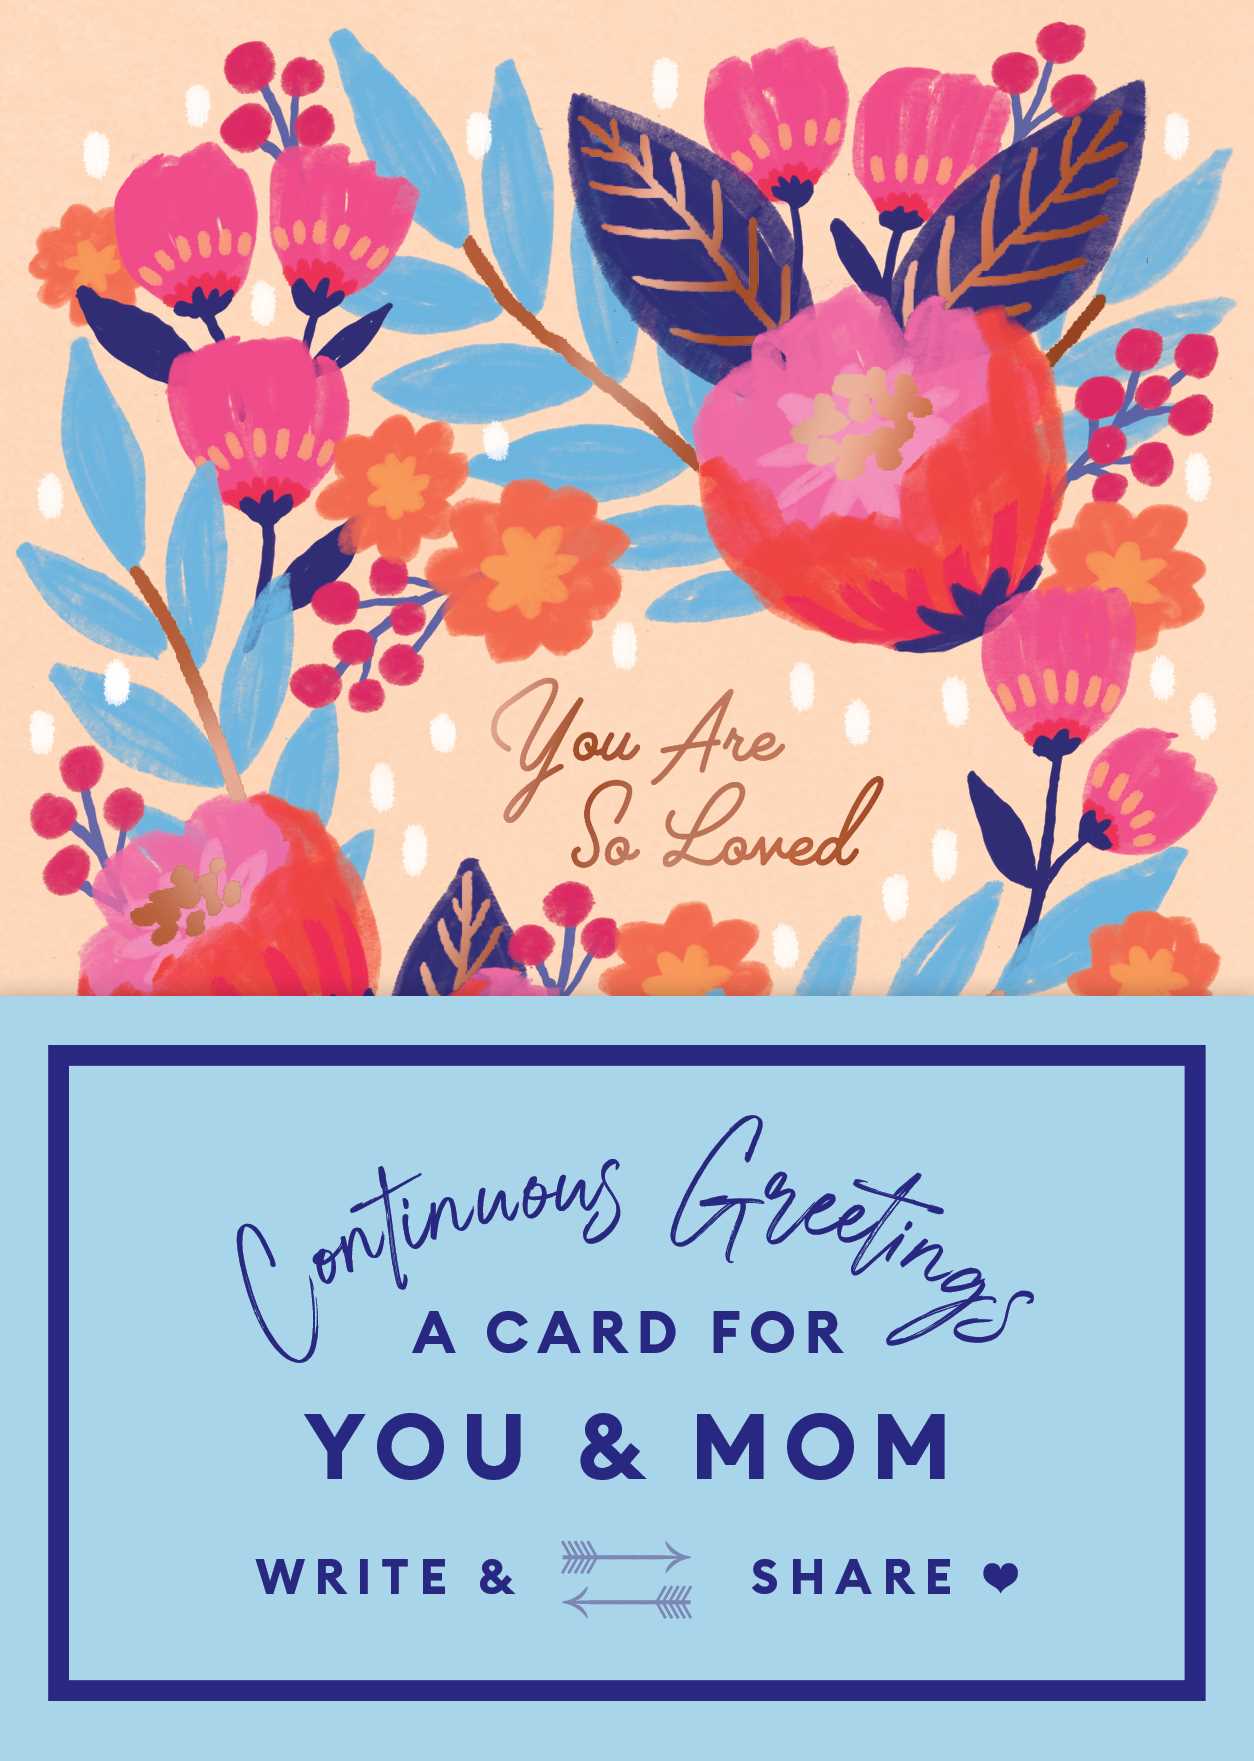 A Card for You and Mom (Continuous Greetings)